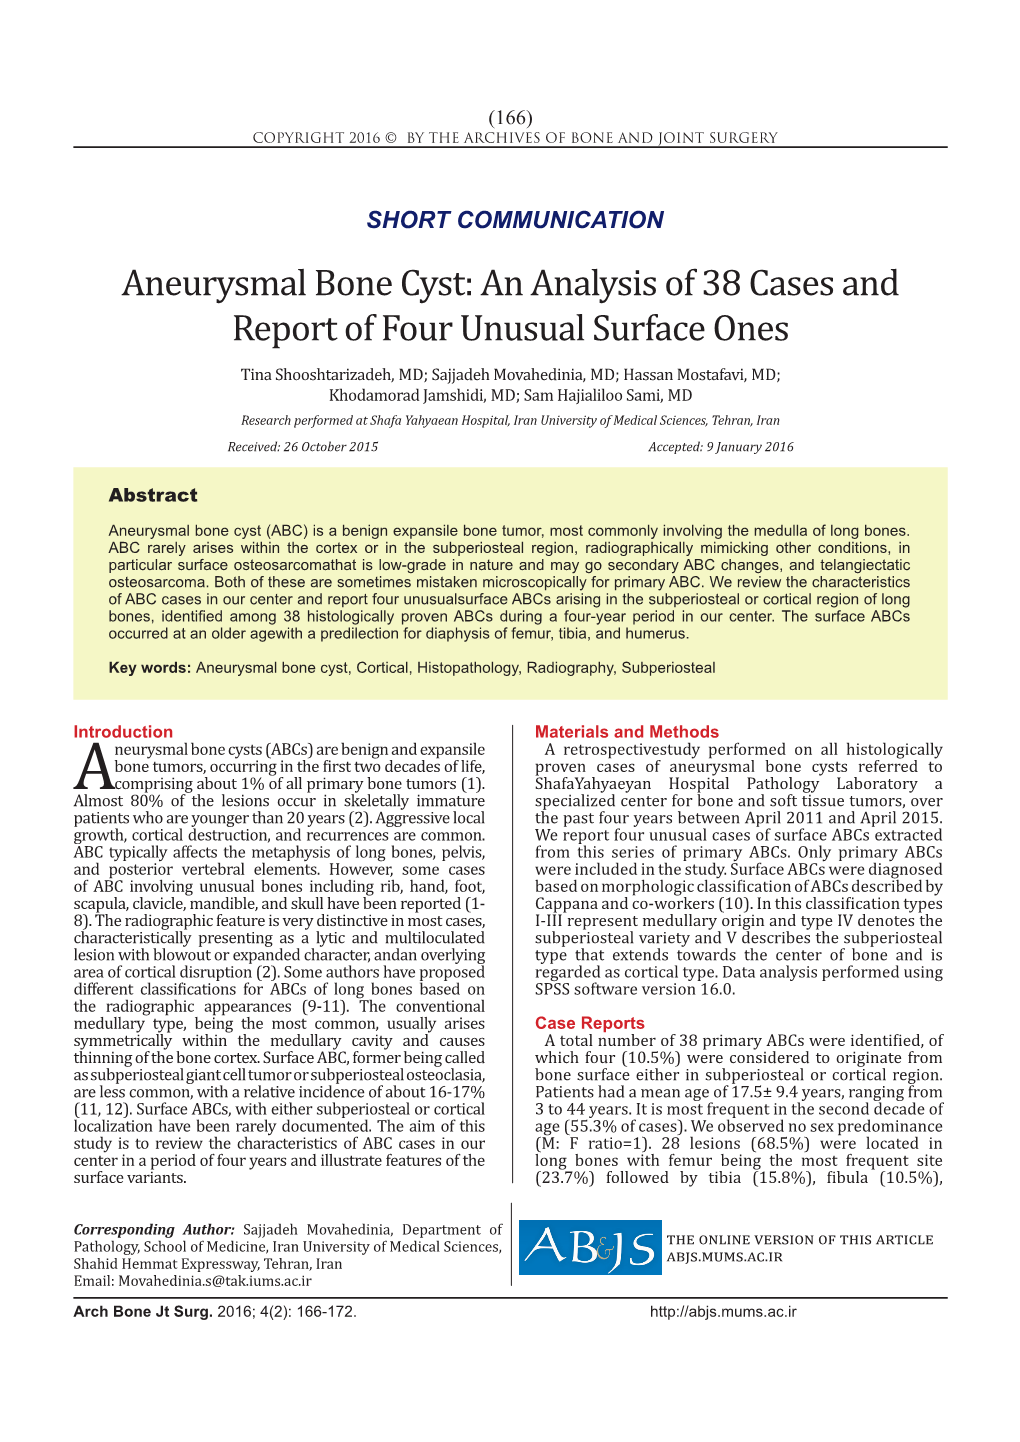 Aneurysmal Bone Cyst: an Analysis of 38 Cases and Report of Four